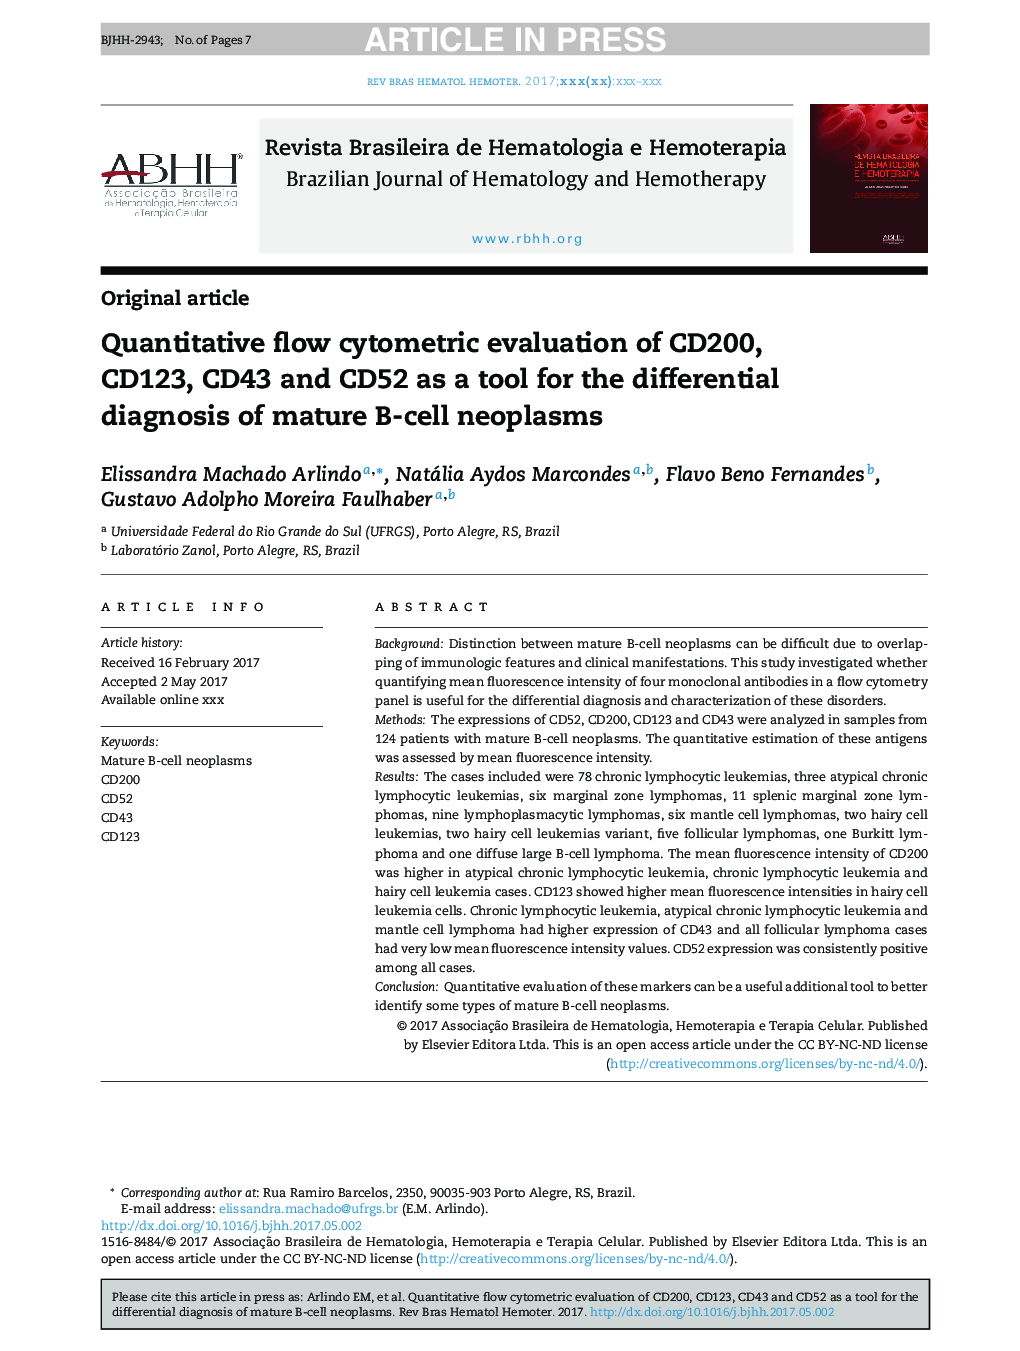 Quantitative flow cytometric evaluation of CD200, CD123, CD43 and CD52 as a tool for the differential diagnosis of mature B-cell neoplasms